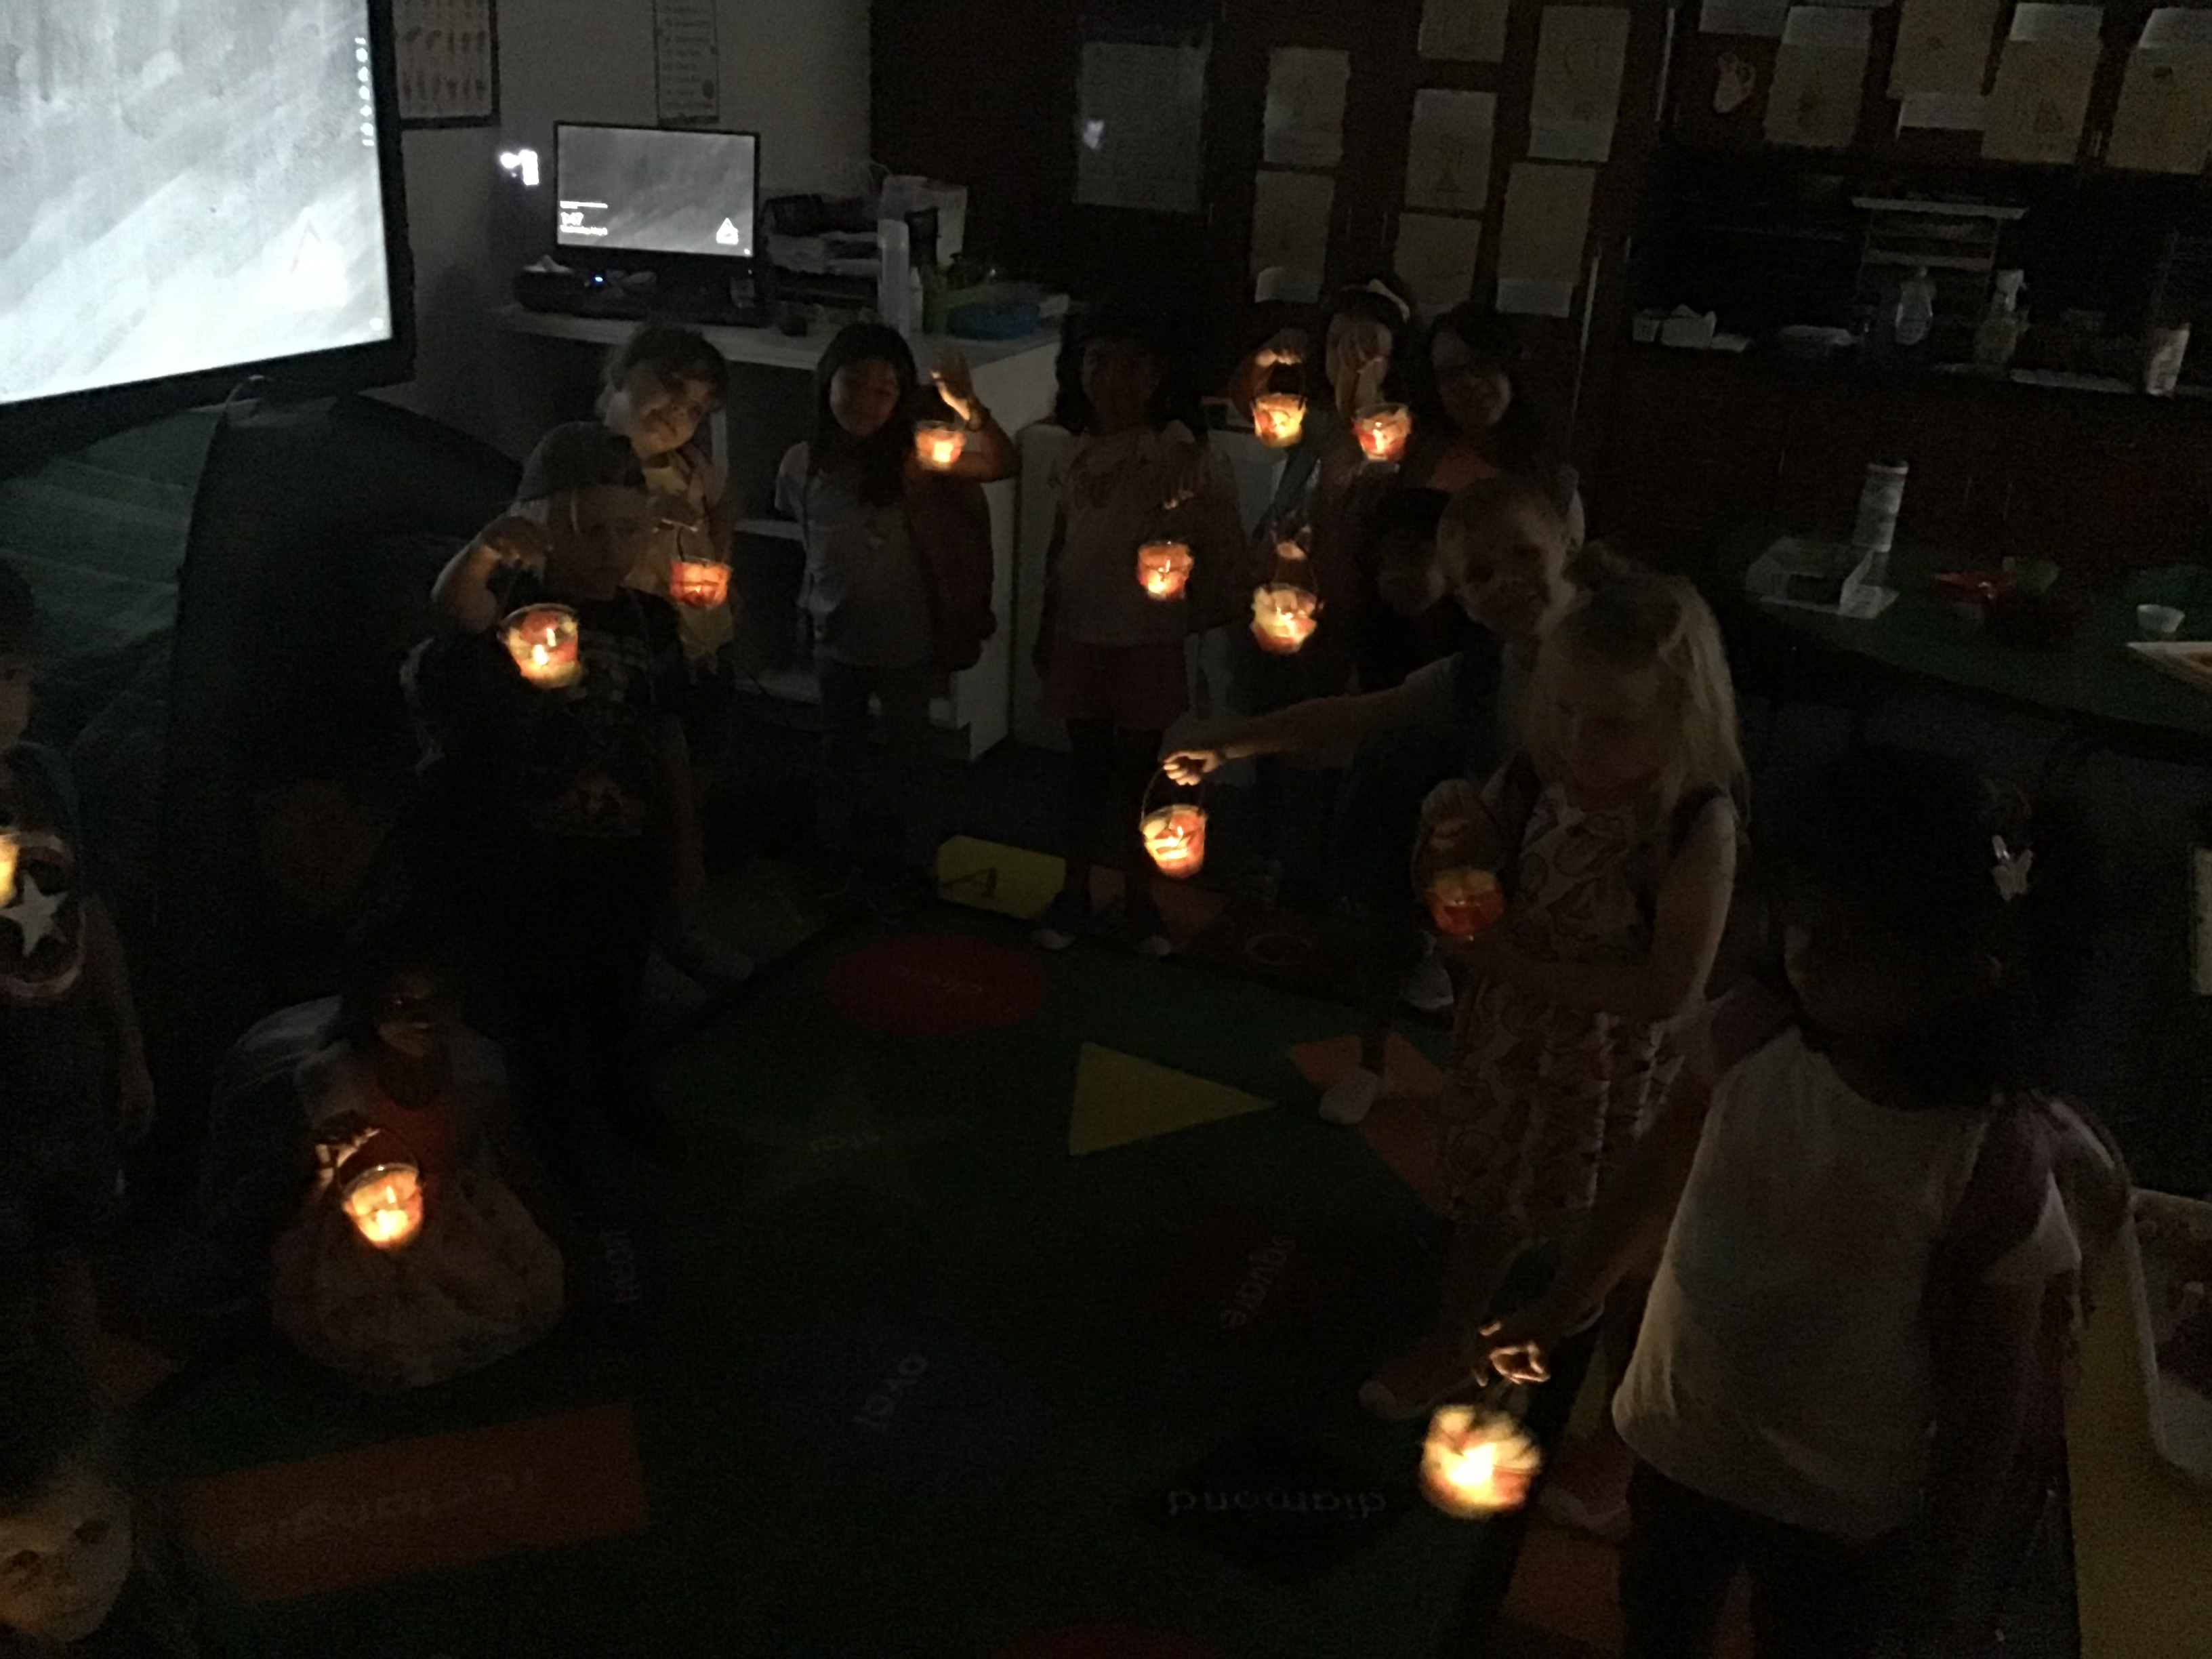 Students holding up their twinkling lanterns that were made for Art.